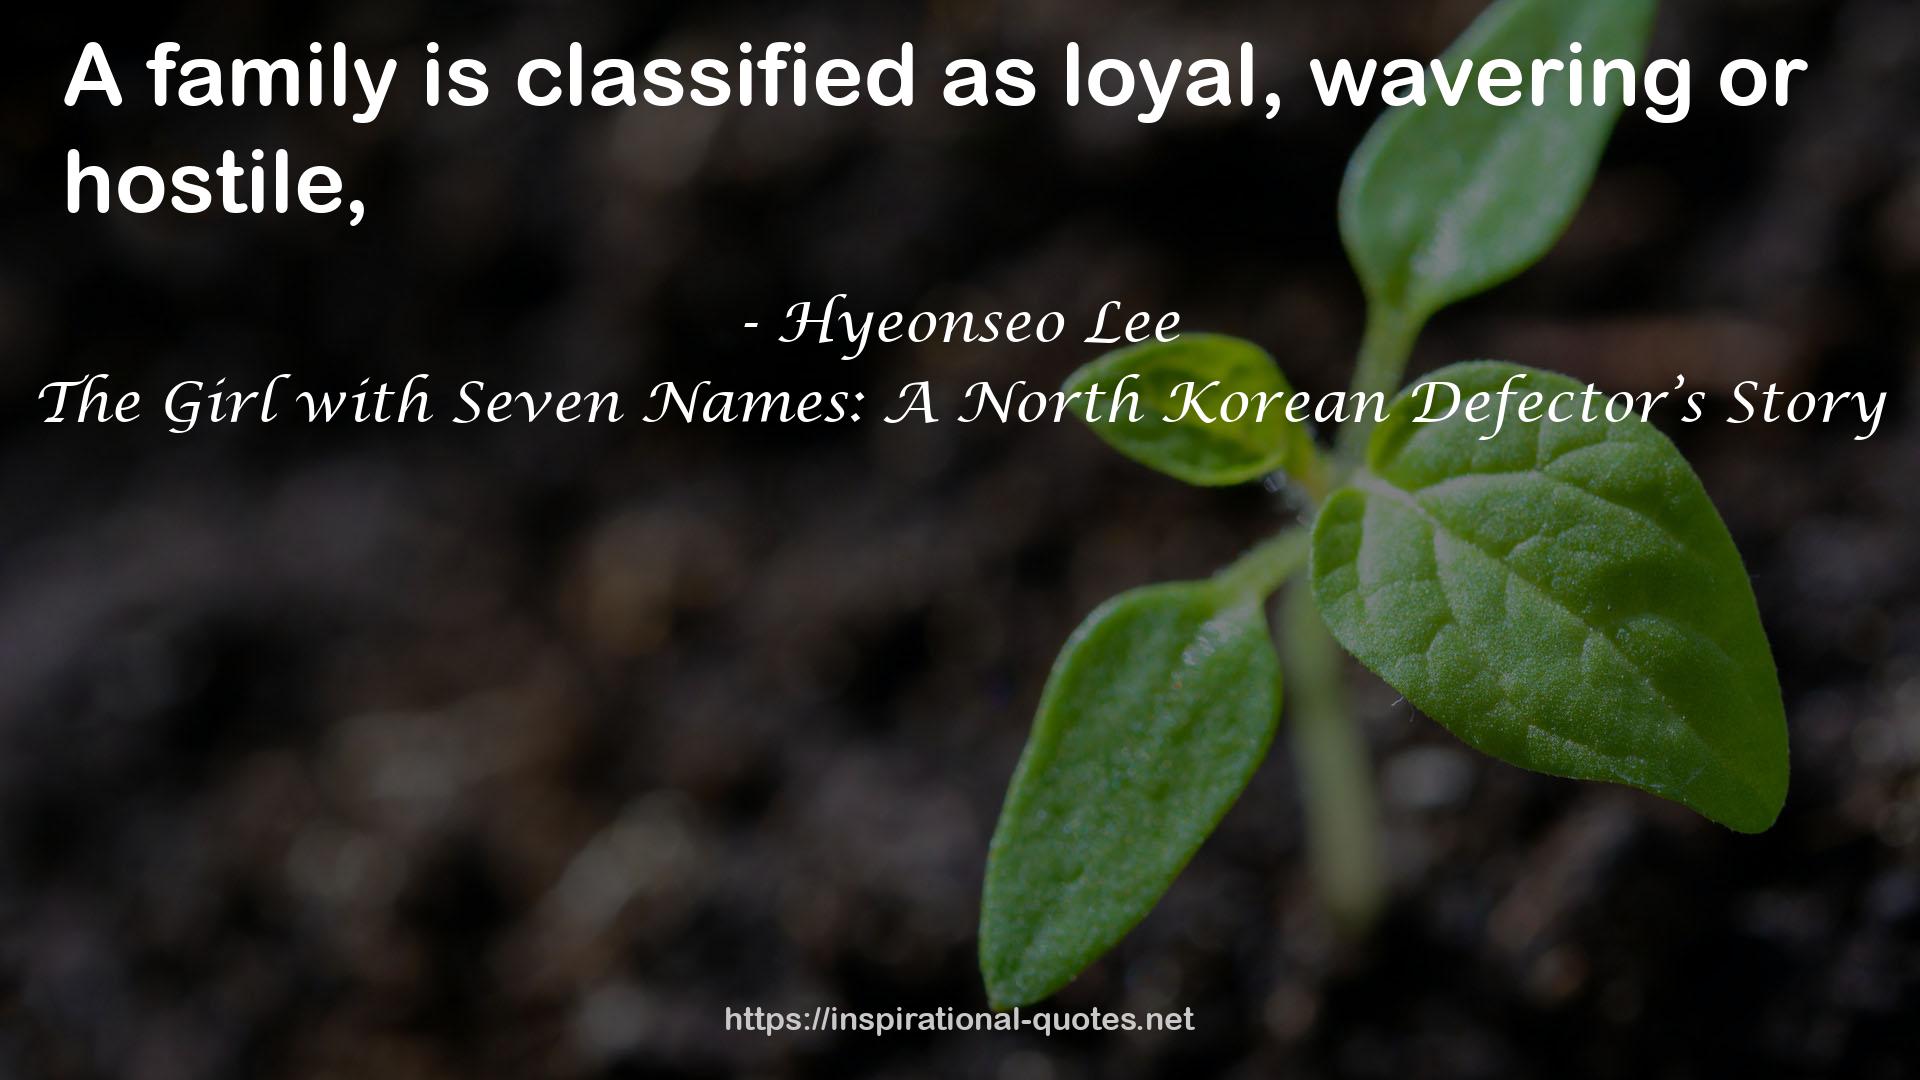 The Girl with Seven Names: A North Korean Defector’s Story QUOTES